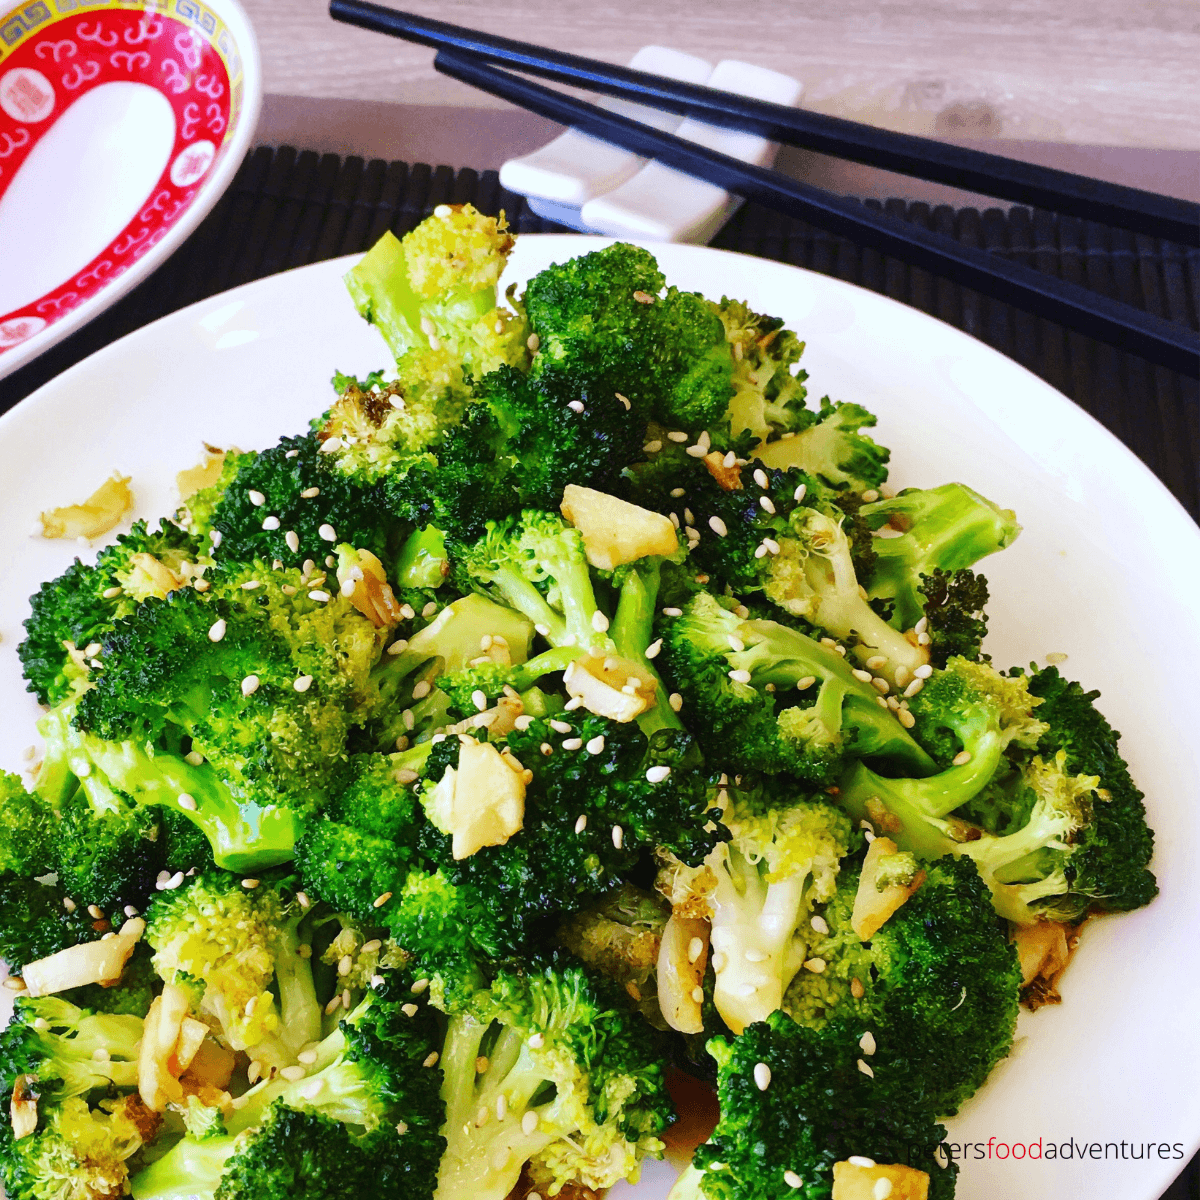 Oven Roasted Broccoli with Garlic and Soy Sauce is healthy, easy and delicious. Chinese style, roasted with garlic, flavorful and packed full of vitamins. The best broccoli side dish you’ll ever make!